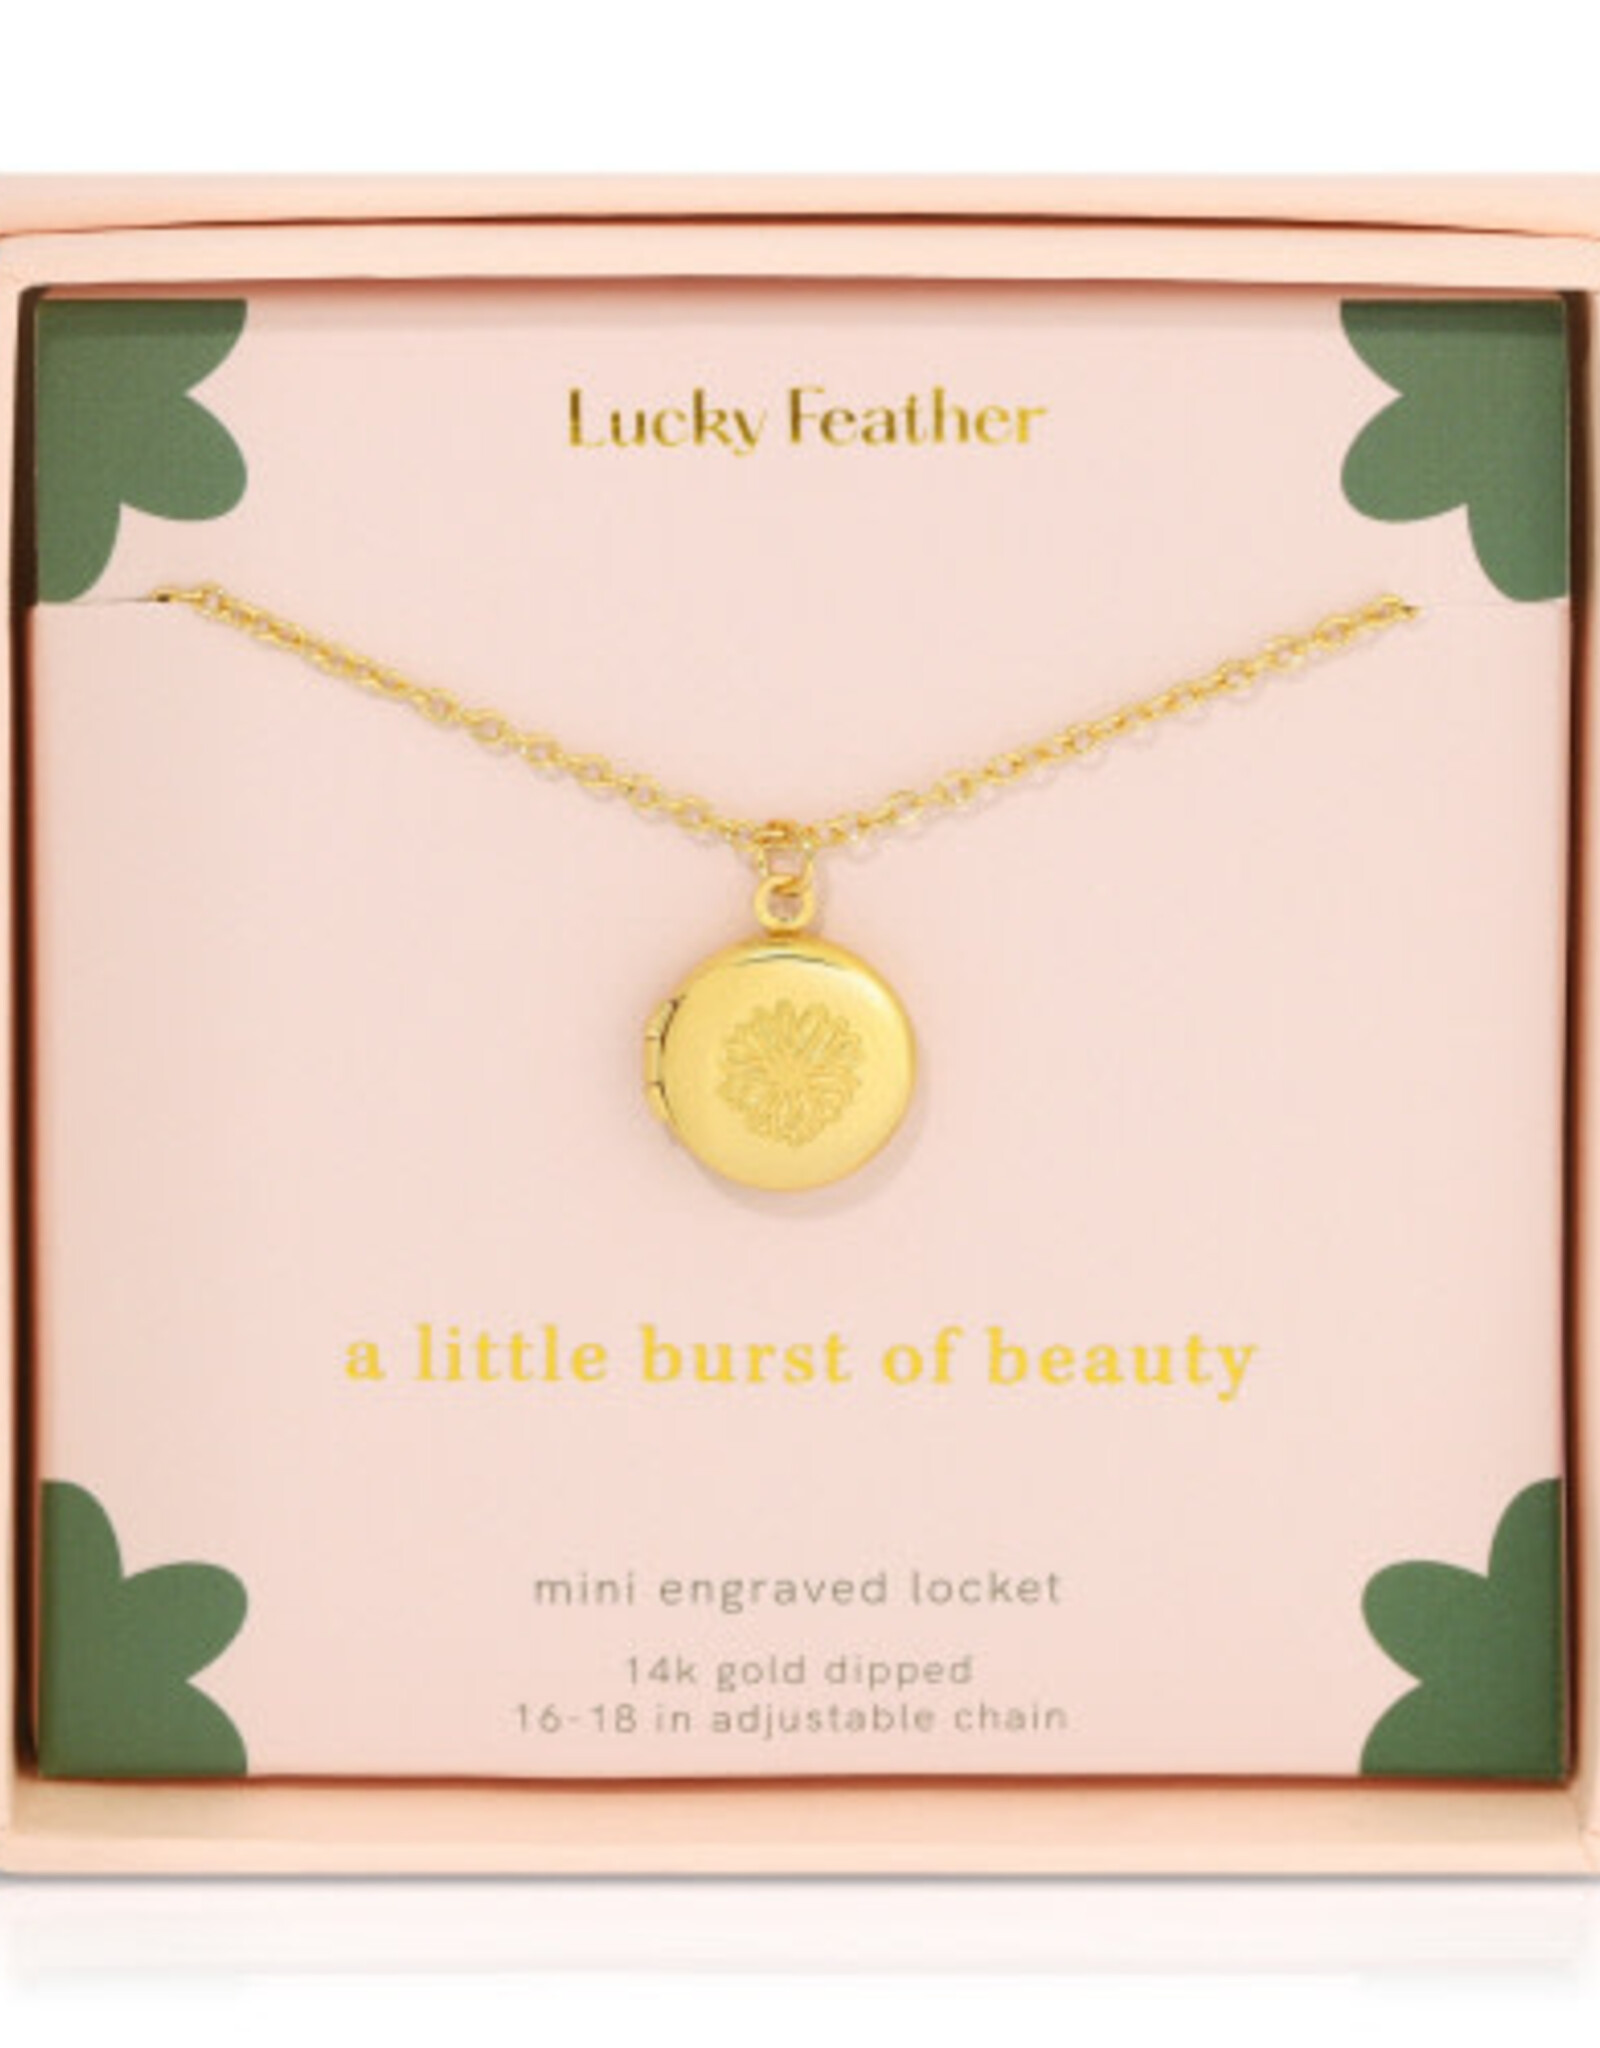 Lucky Feather Mini Engraved Lockets